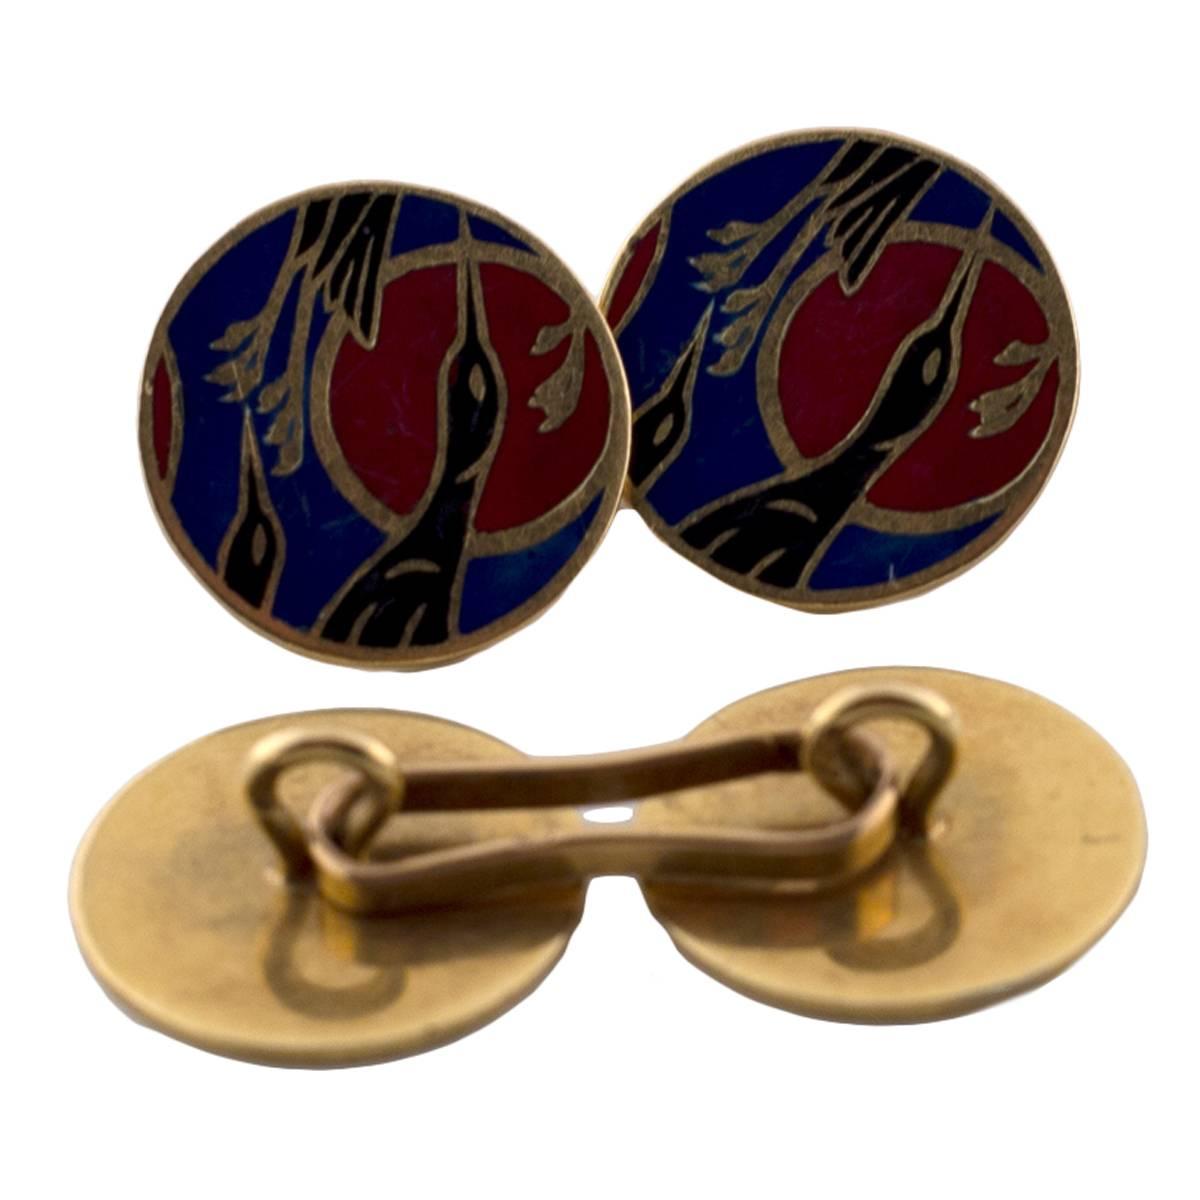 These French 18K Yellow Gold and Enamel cufflinks are decorated with Japanese-styled cranes in a beautiful and serene setting. Blacks, blues, and reds set the scene in enamel in the time period of the 1940's. Vintage and elegant these stunning